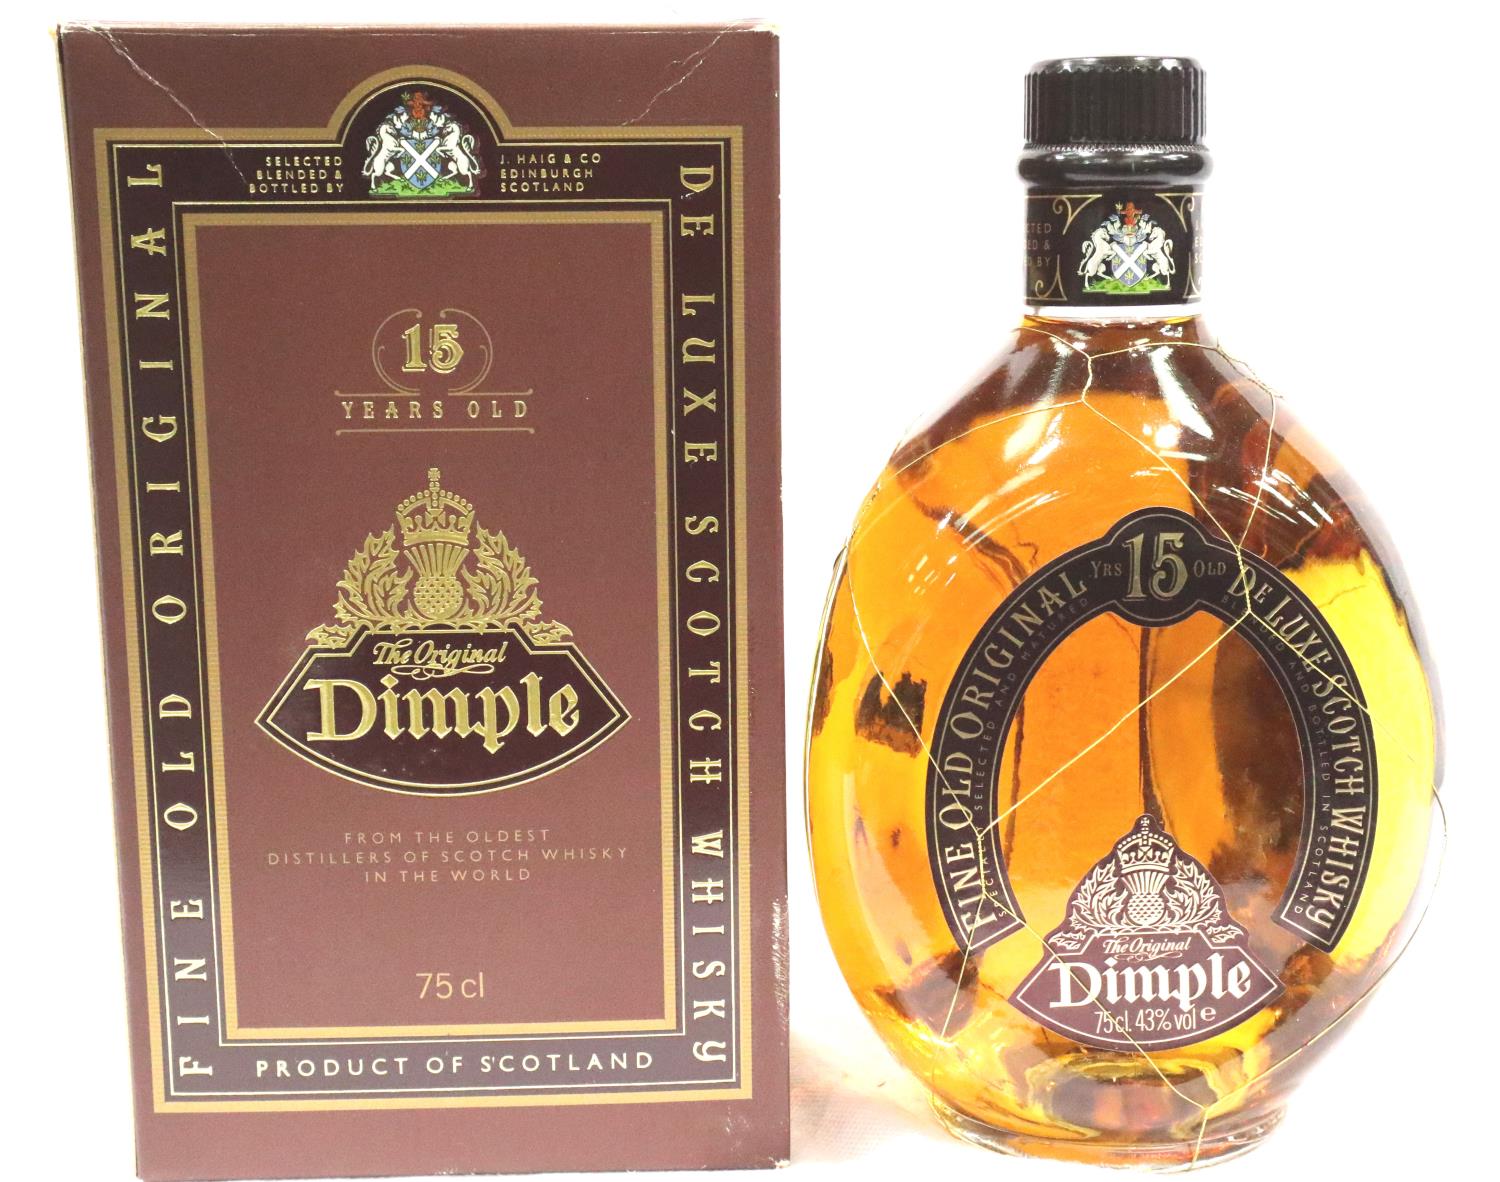 Boxed 75cl bottle 15 year old dimple scotch whisky, seal intact. P&P Group 2 (£18+VAT for the